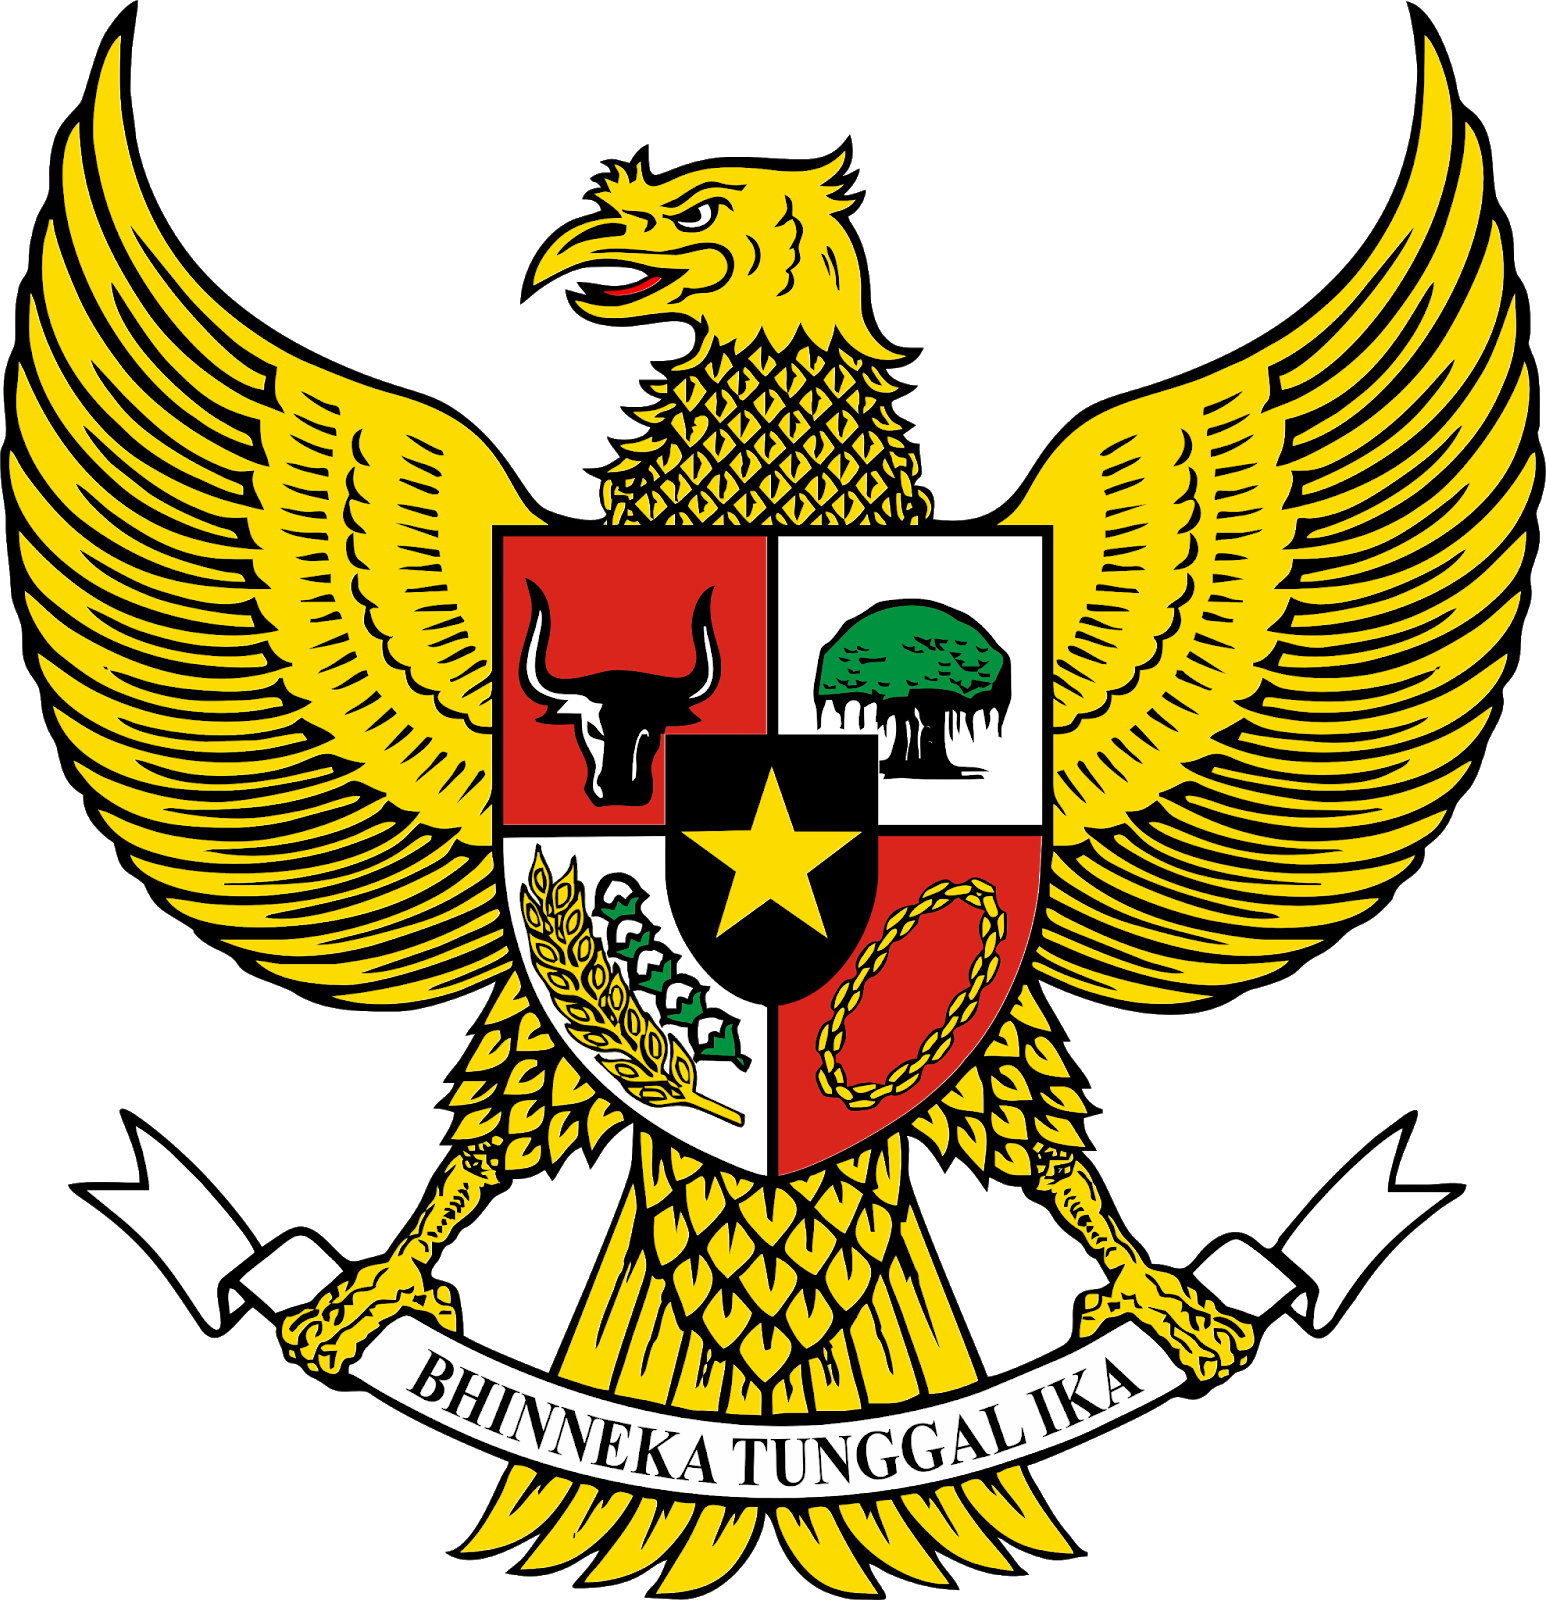 A Yellow And Red Eagle With A Shield And A Star